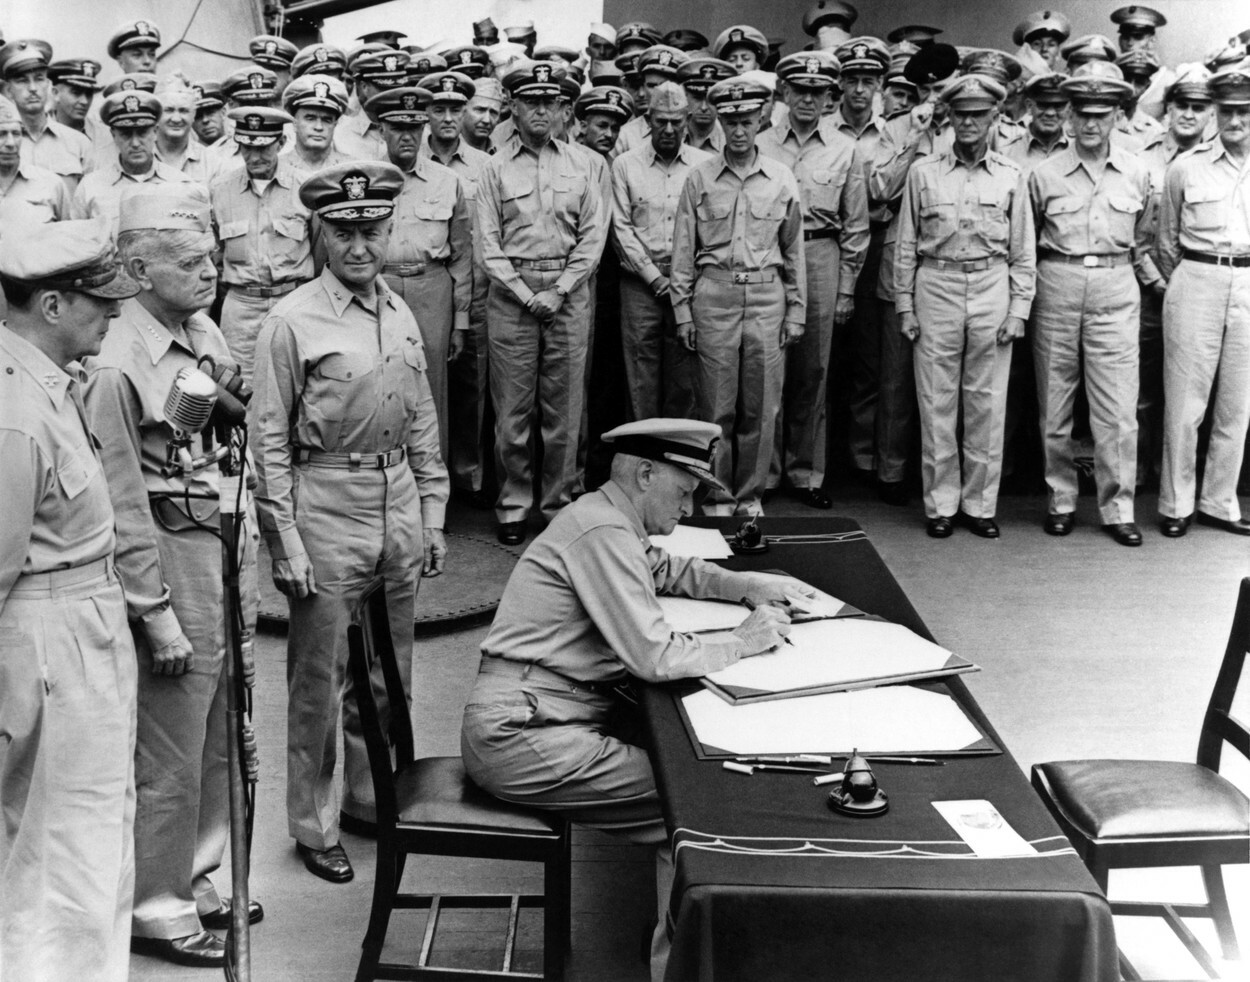 September 2, 2022: 77 years since the surrender of Japan |  PHOTO GALLERY - Image 4